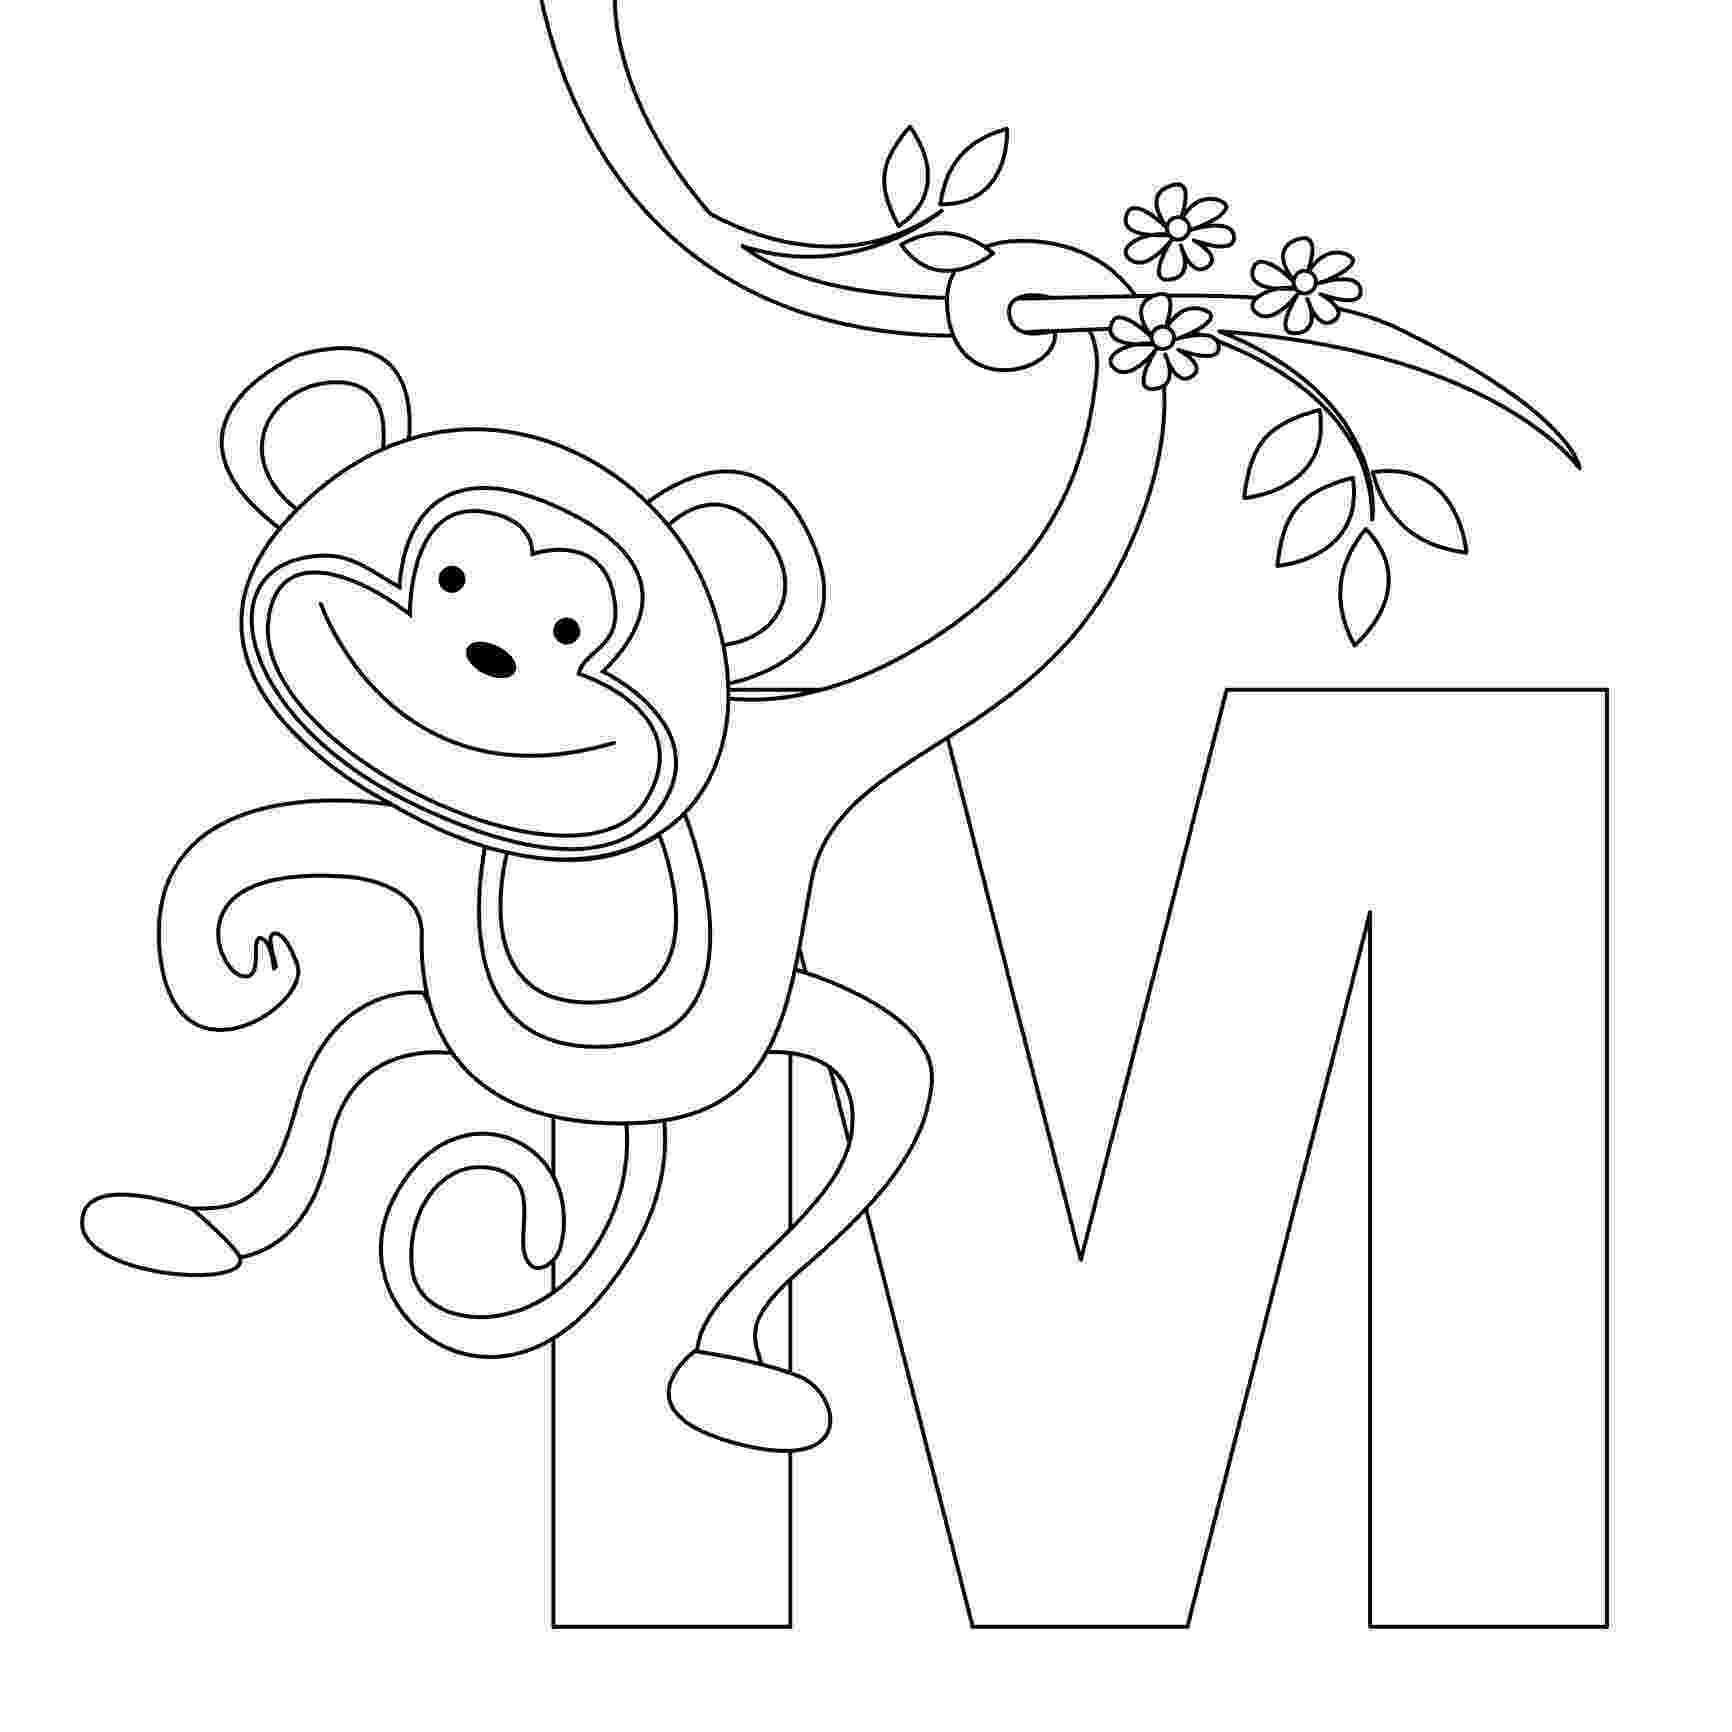 free printable alphabet coloring pages free printable alphabet coloring pages for kids best free pages printable coloring alphabet 